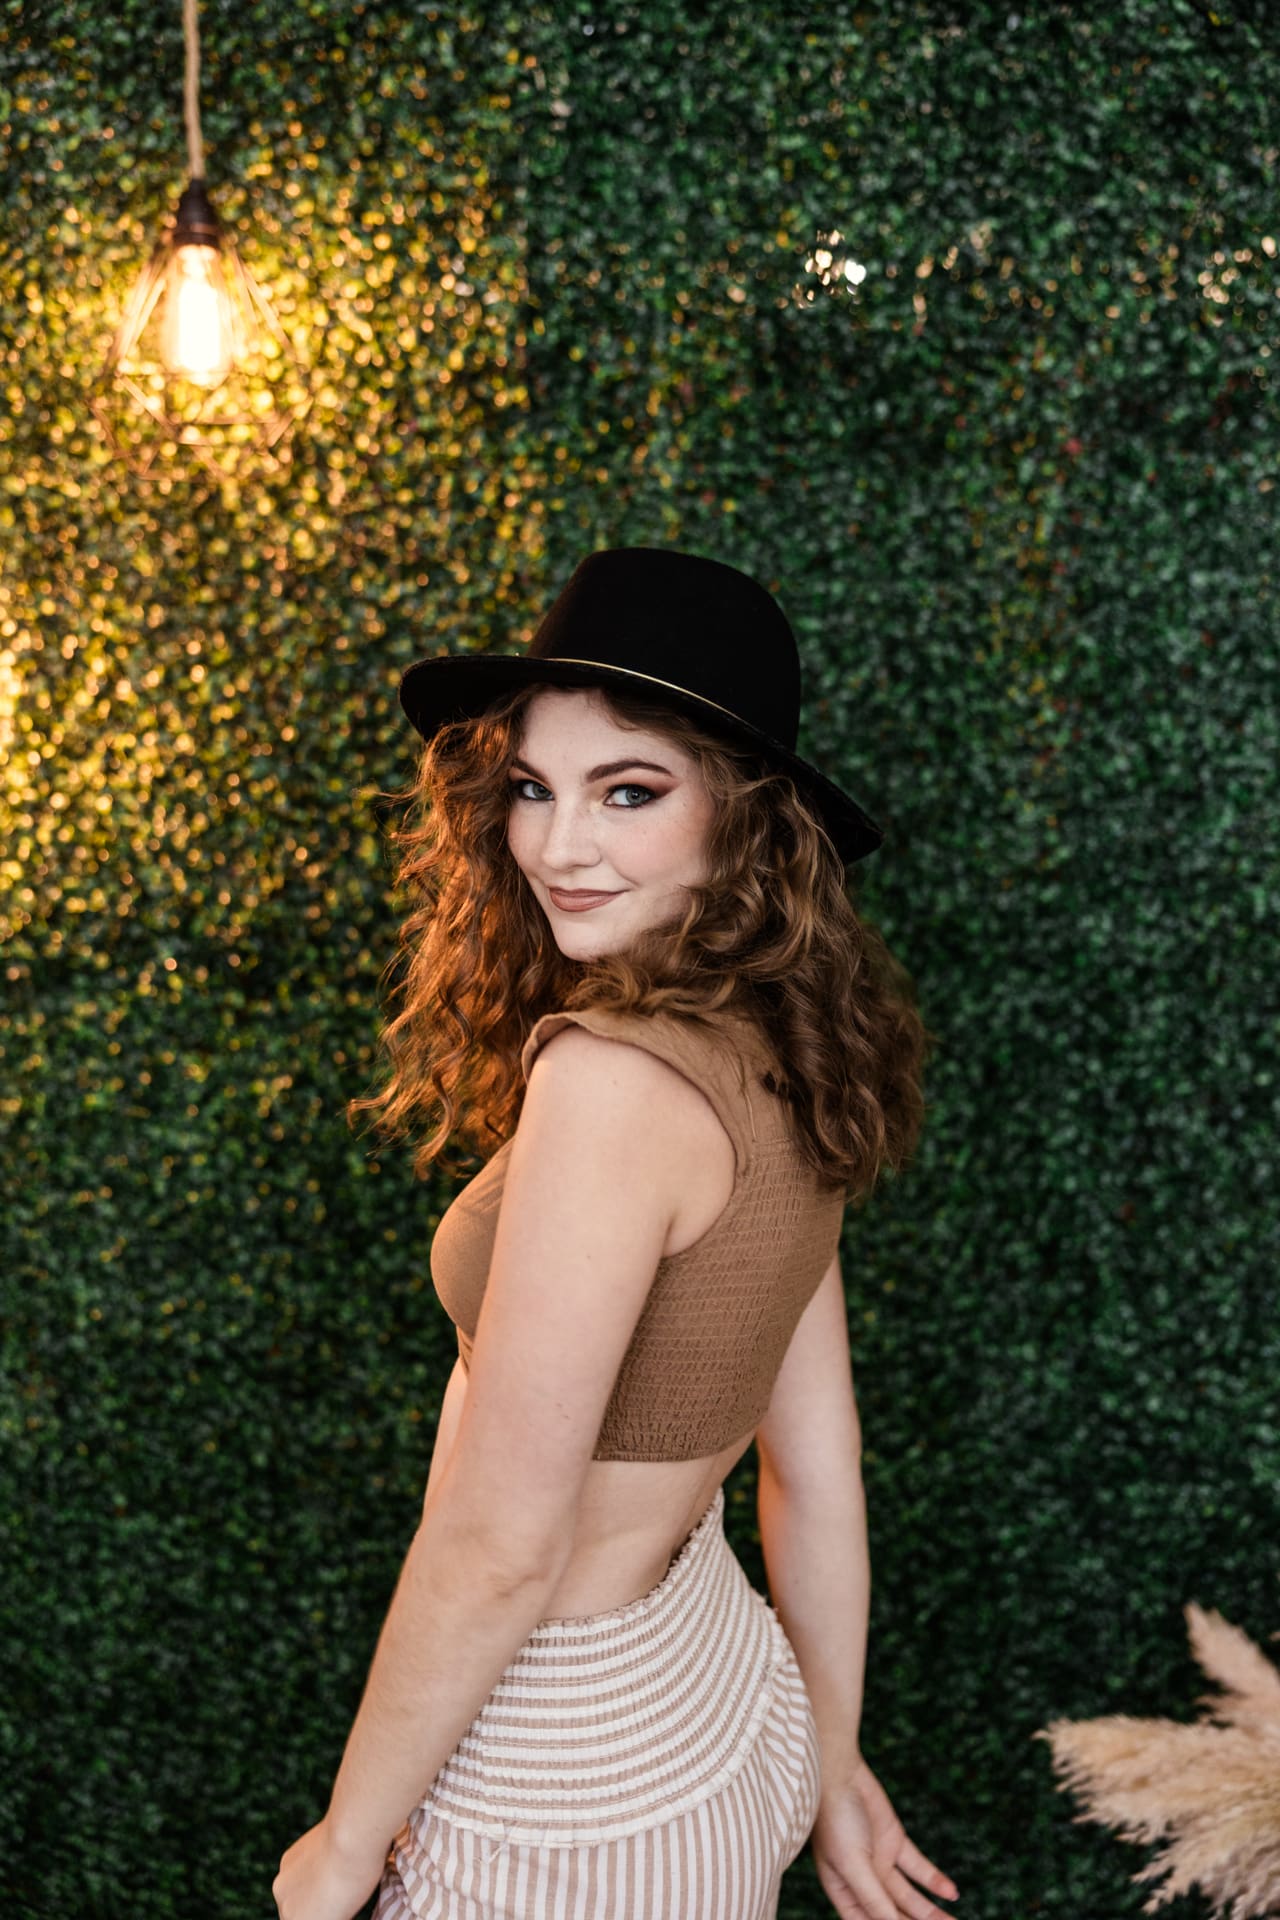 Boho model wearing floppy black hat strikes a pose in front of greenery wall during fashion photoshoot at Chicago photography studio P&M Studio